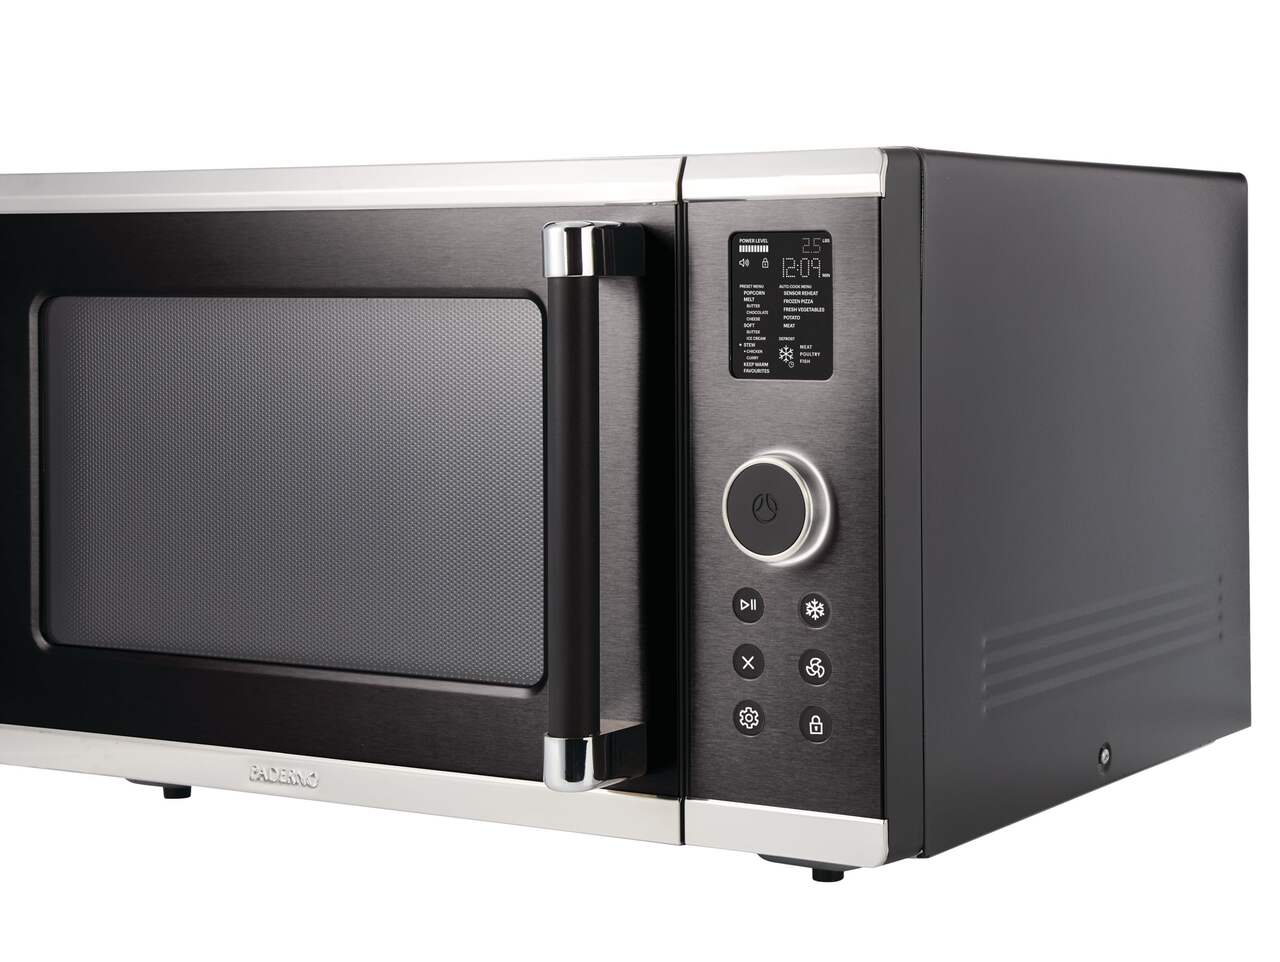 https://media-www.canadiantire.ca/product/living/kitchen/white-goods/0431025/paderno-1-6cu-ft-microwave-brushed-black-3d4250ca-e56a-4d5d-b188-17e5dd2cb08e-jpgrendition.jpg?imdensity=1&imwidth=640&impolicy=mZoom